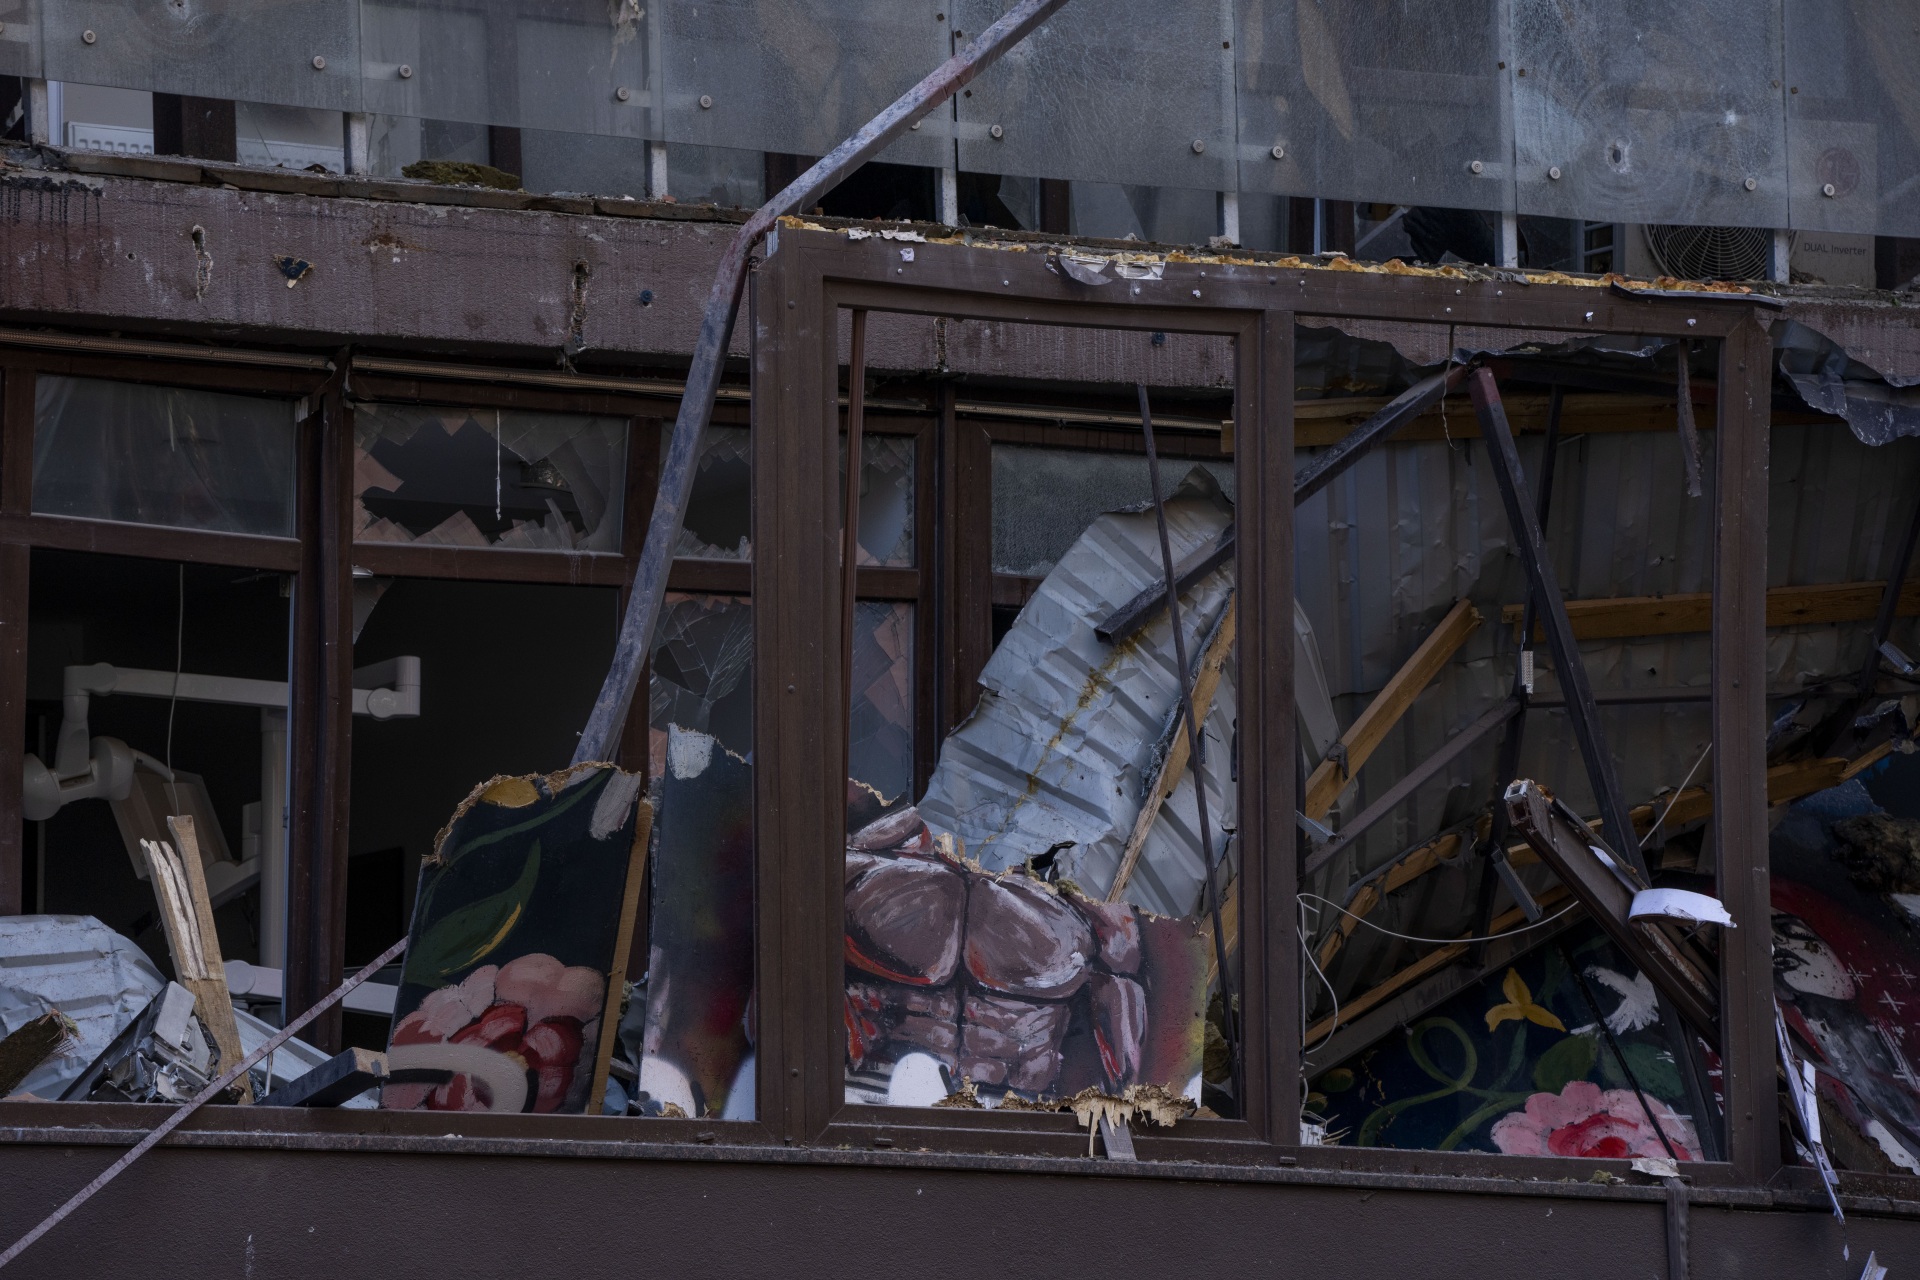 Damage of a residential building following explosions, in Kyiv, Ukraine, Sunday, June 26, 2022. Several explosions rocked the west of the Ukrainian capital in the early hours of Sunday morning, with at least two residential buildings struck, according to Kyiv mayor Vitali Klitschko. (AP Photo/Nariman El-Mofty)